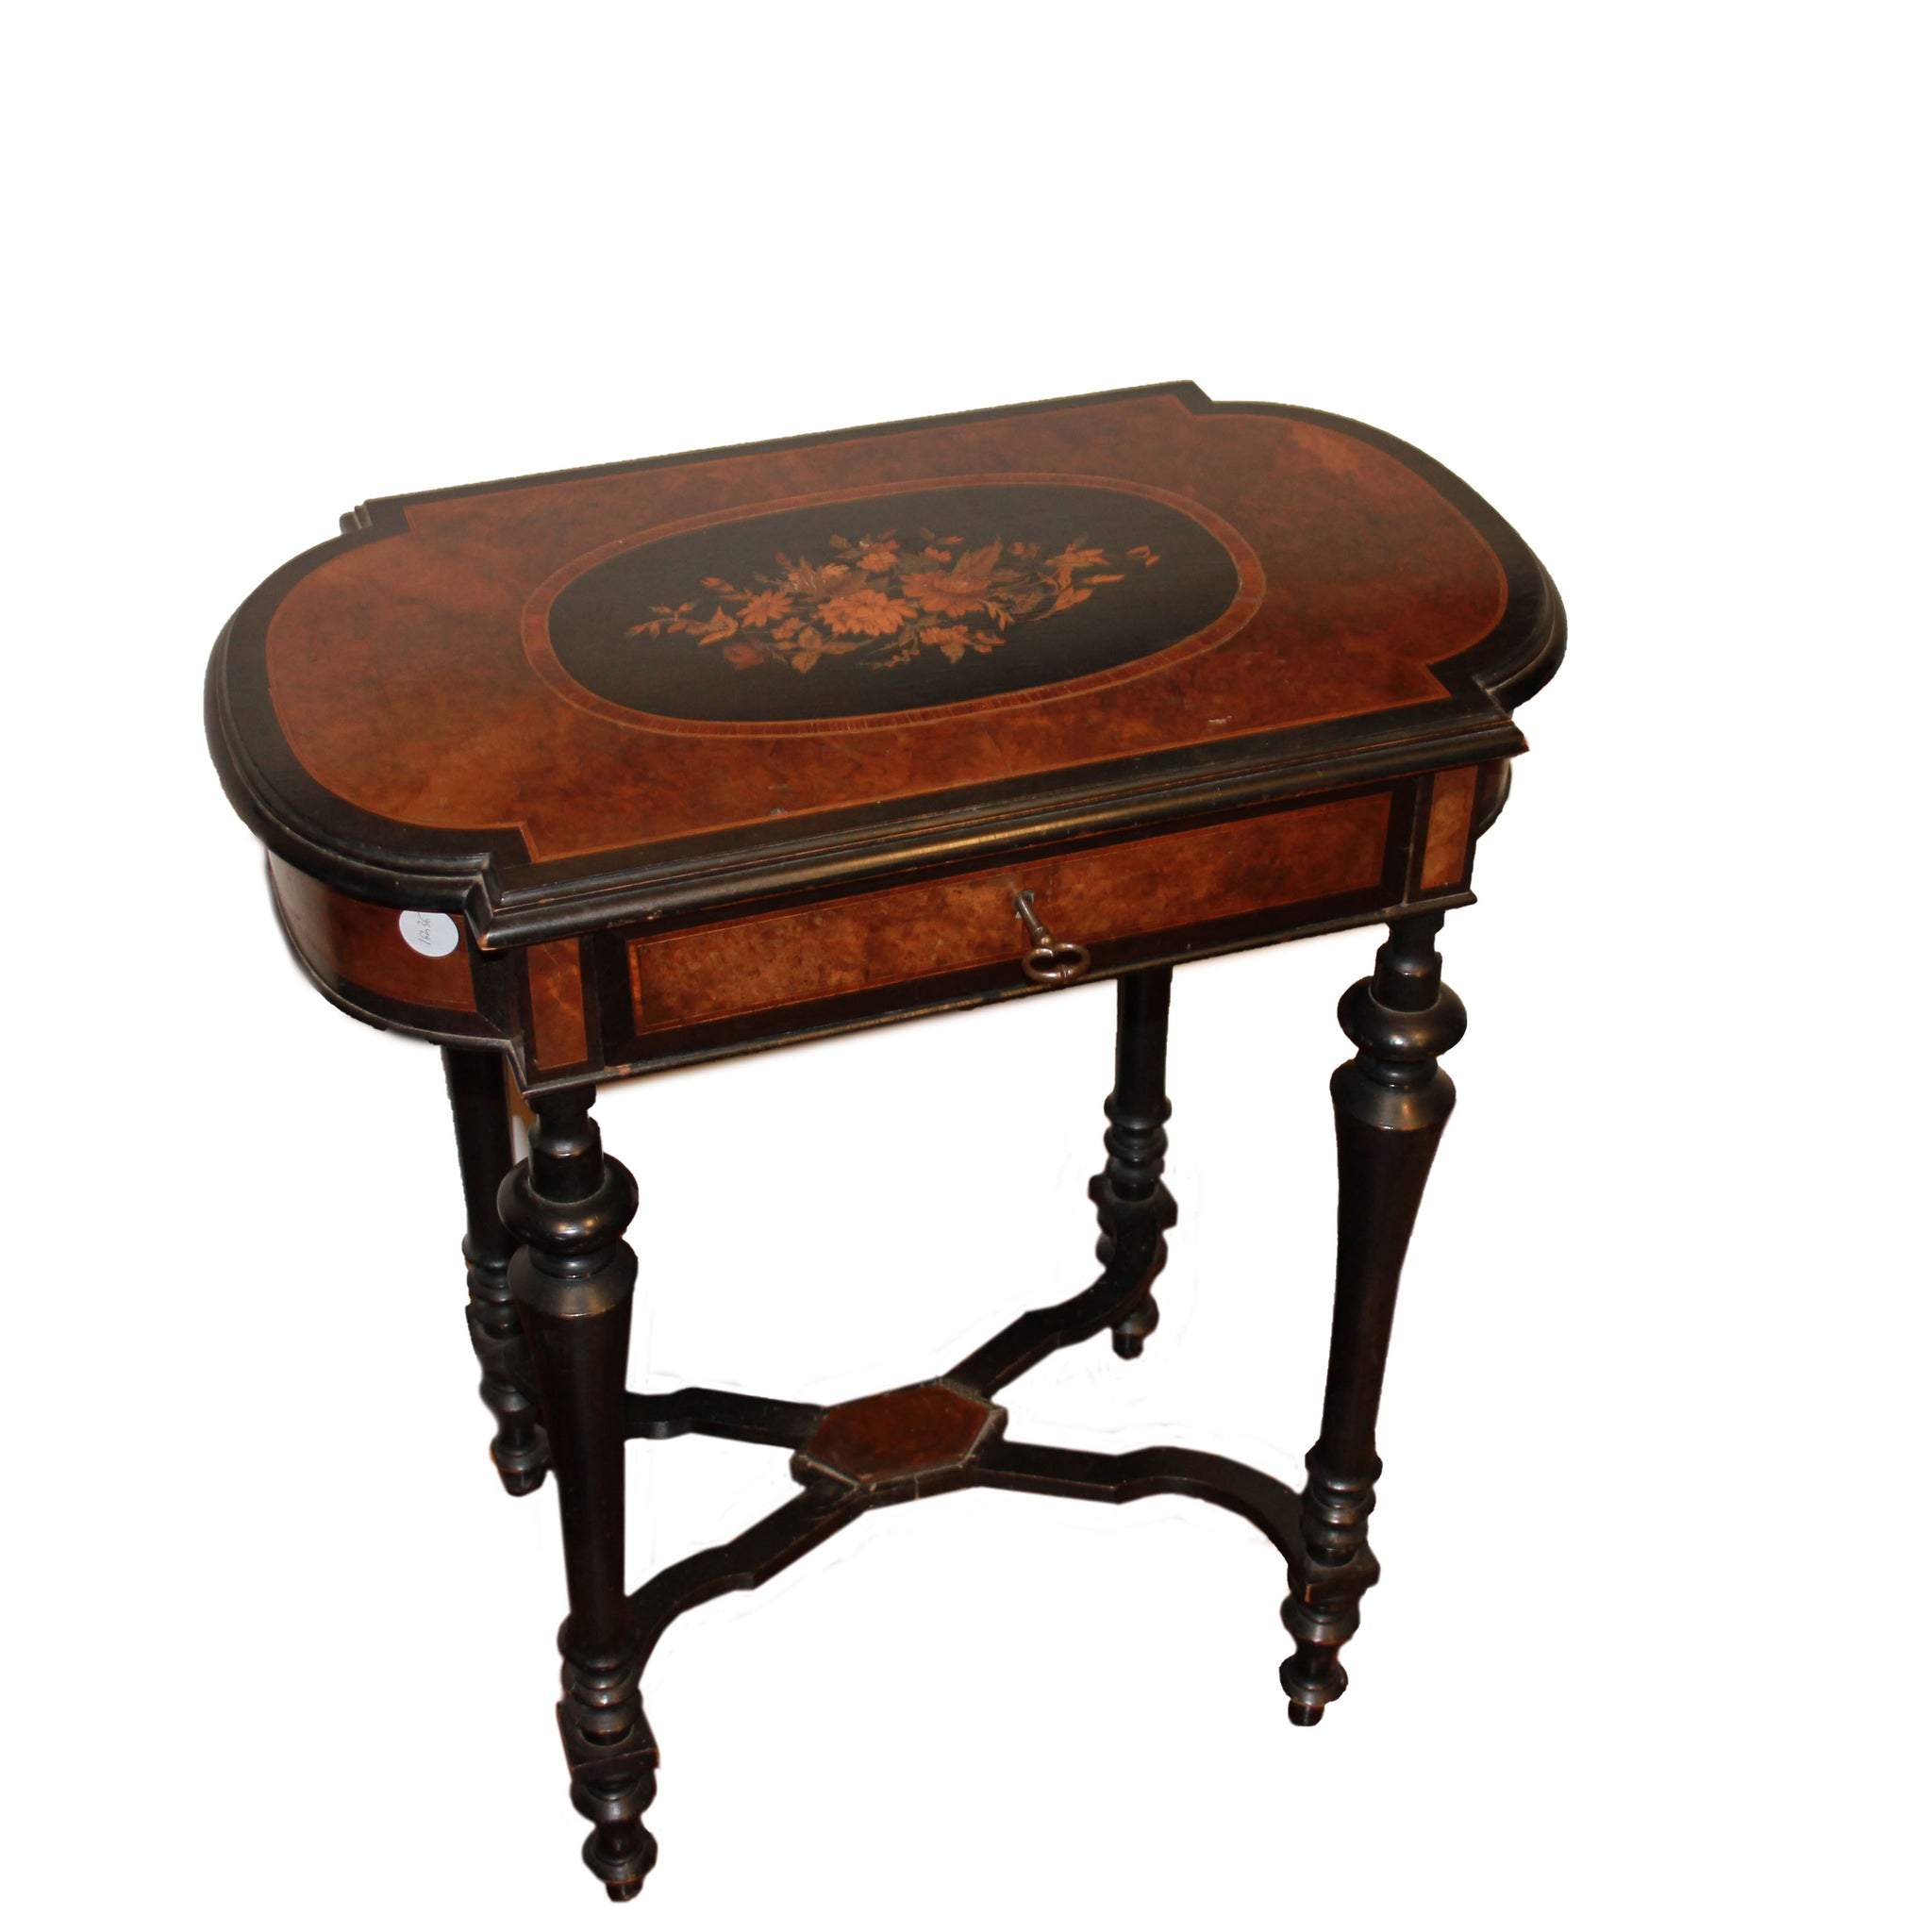 French Louis XVI style dressing table in ebony and briar wood, 19th century